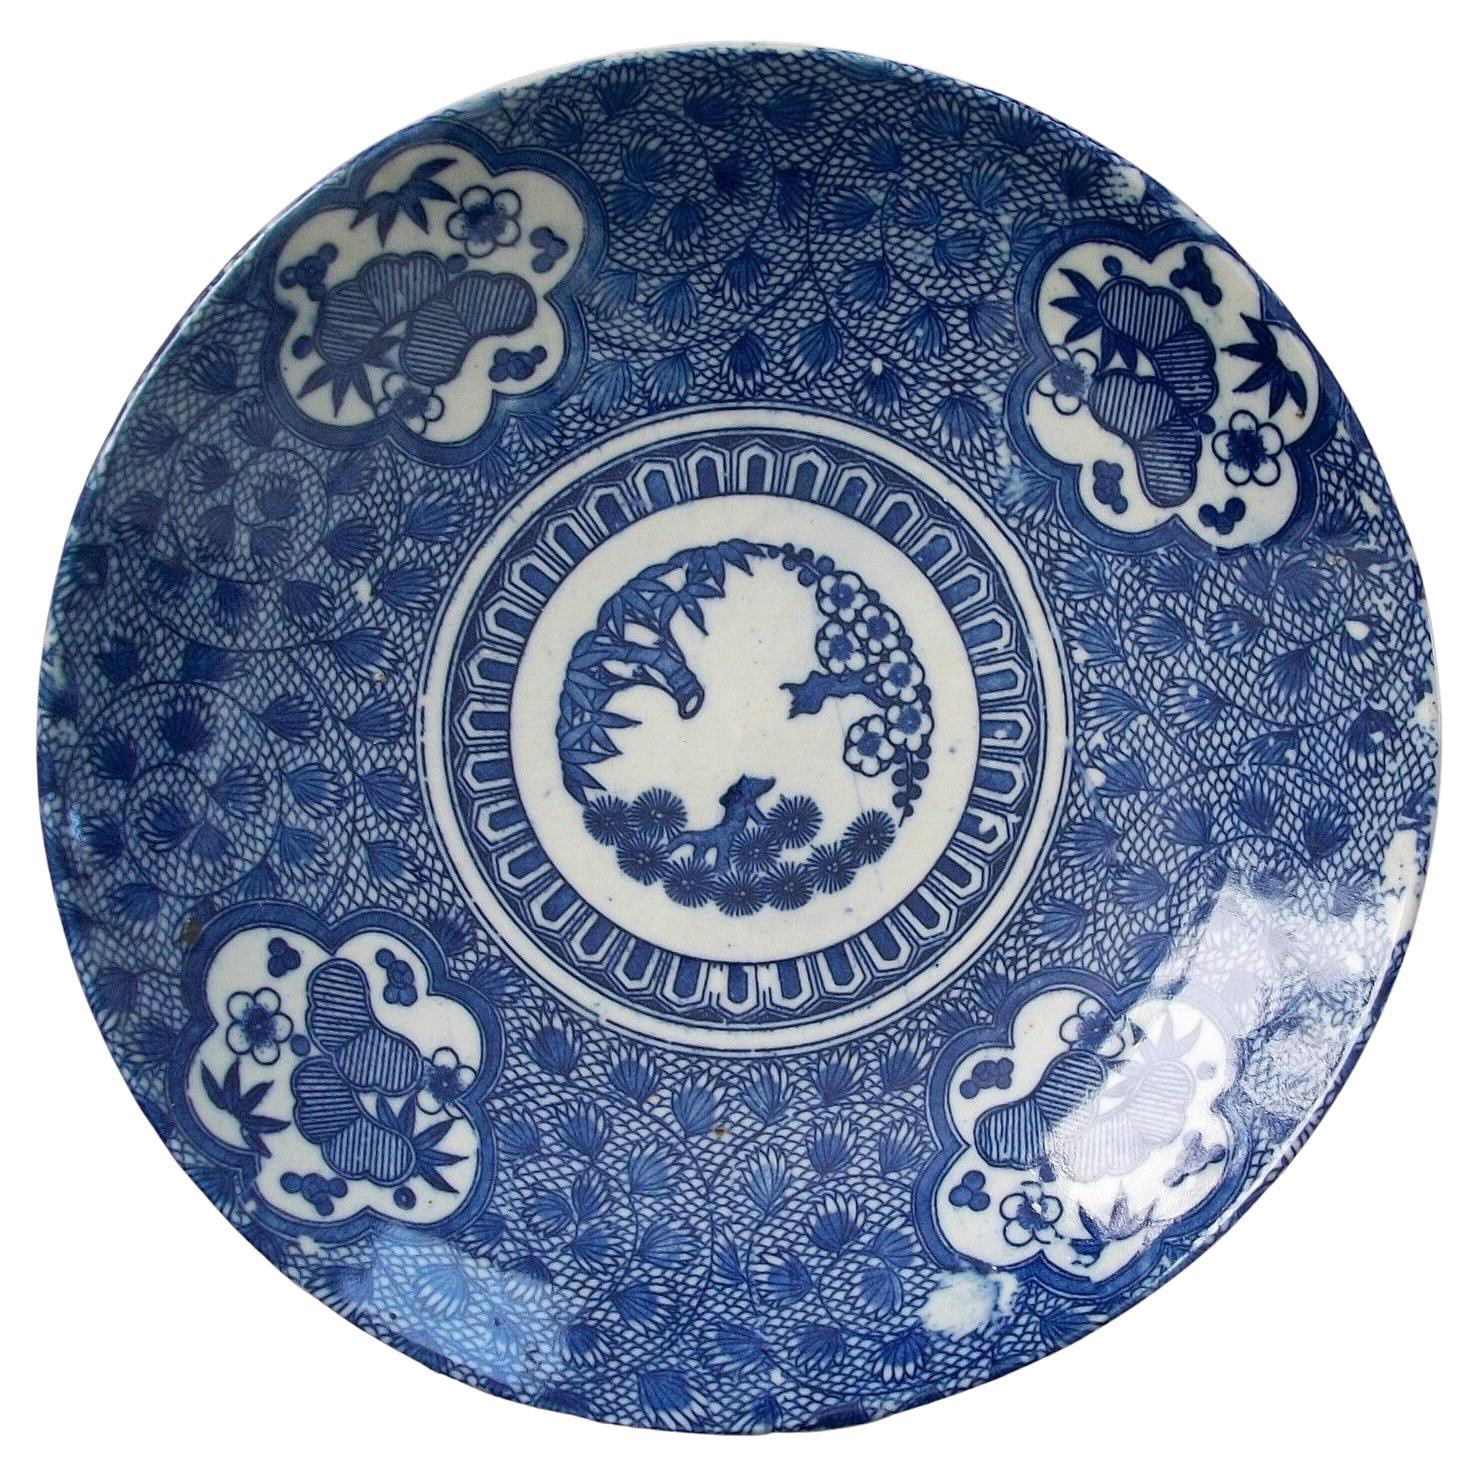 Vintage Blue & White Transfer Decorated Charger, Unsigned, Japan, Mid 20th C.